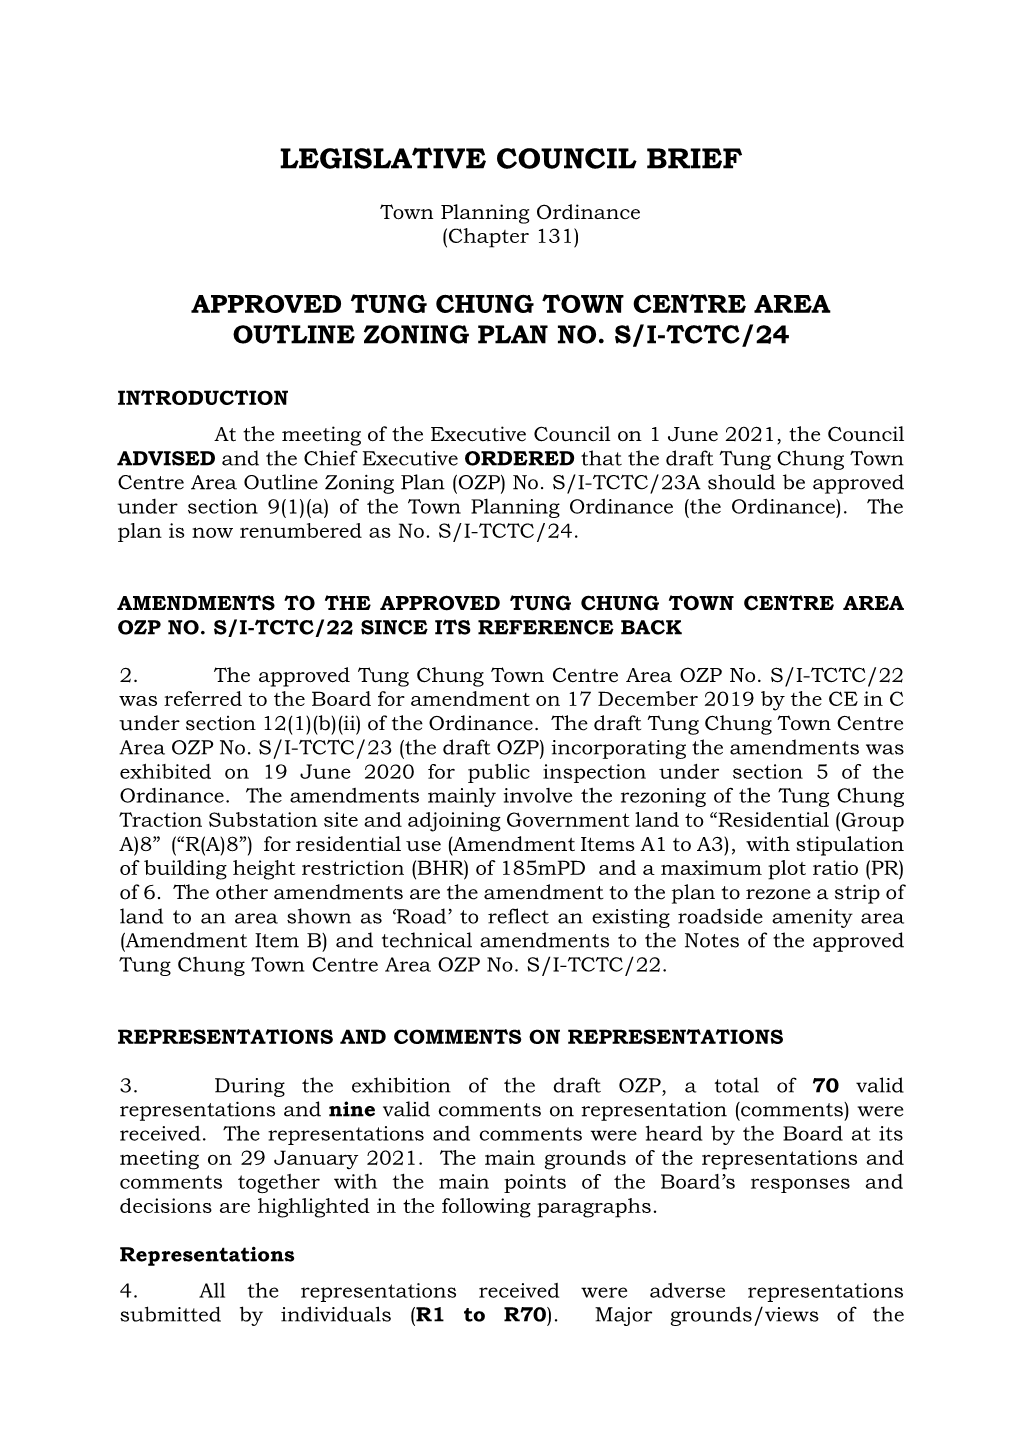 Approved Tung Chung Town Centre Area Outline Zoning Plan No. S/I-Tctc/24